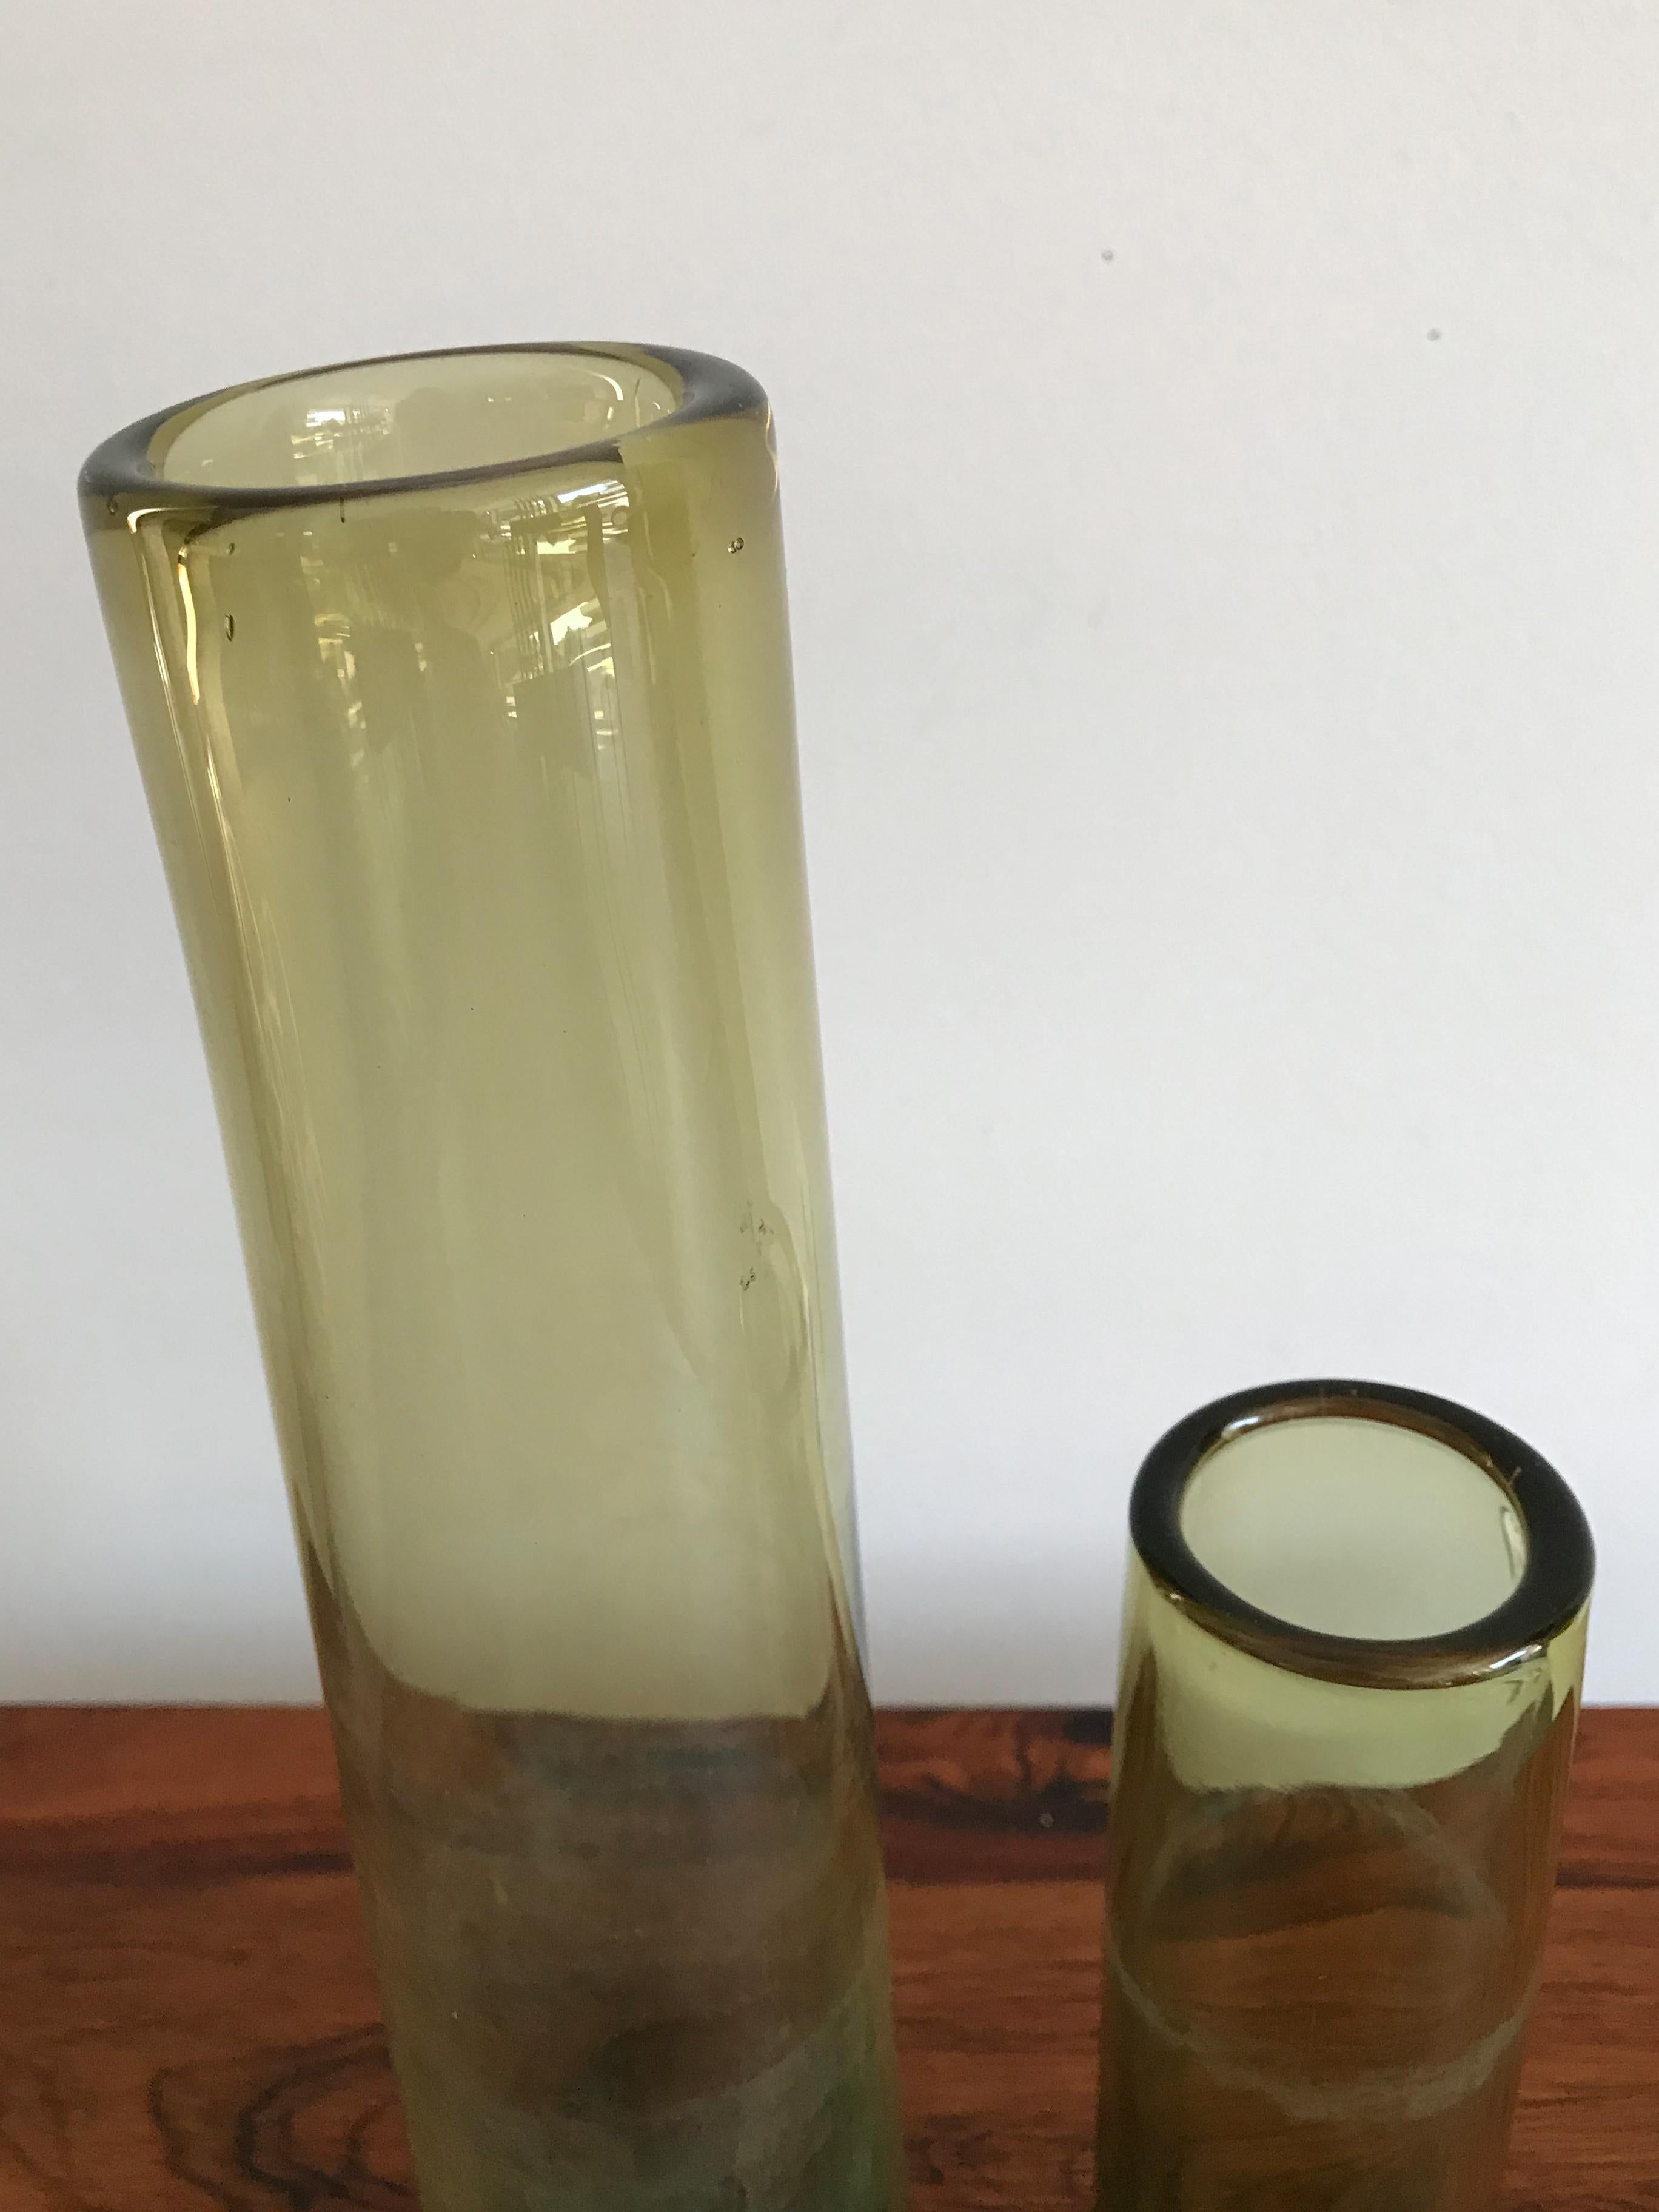 1960s set of two Scandinavian glass vases designed by Danish artist Per Lutken and produced by Holmegaard with mark engraved on the bottom, Mid-Century Modern design, olive color.
Some signs due to normal use over time.
Dimensions from the